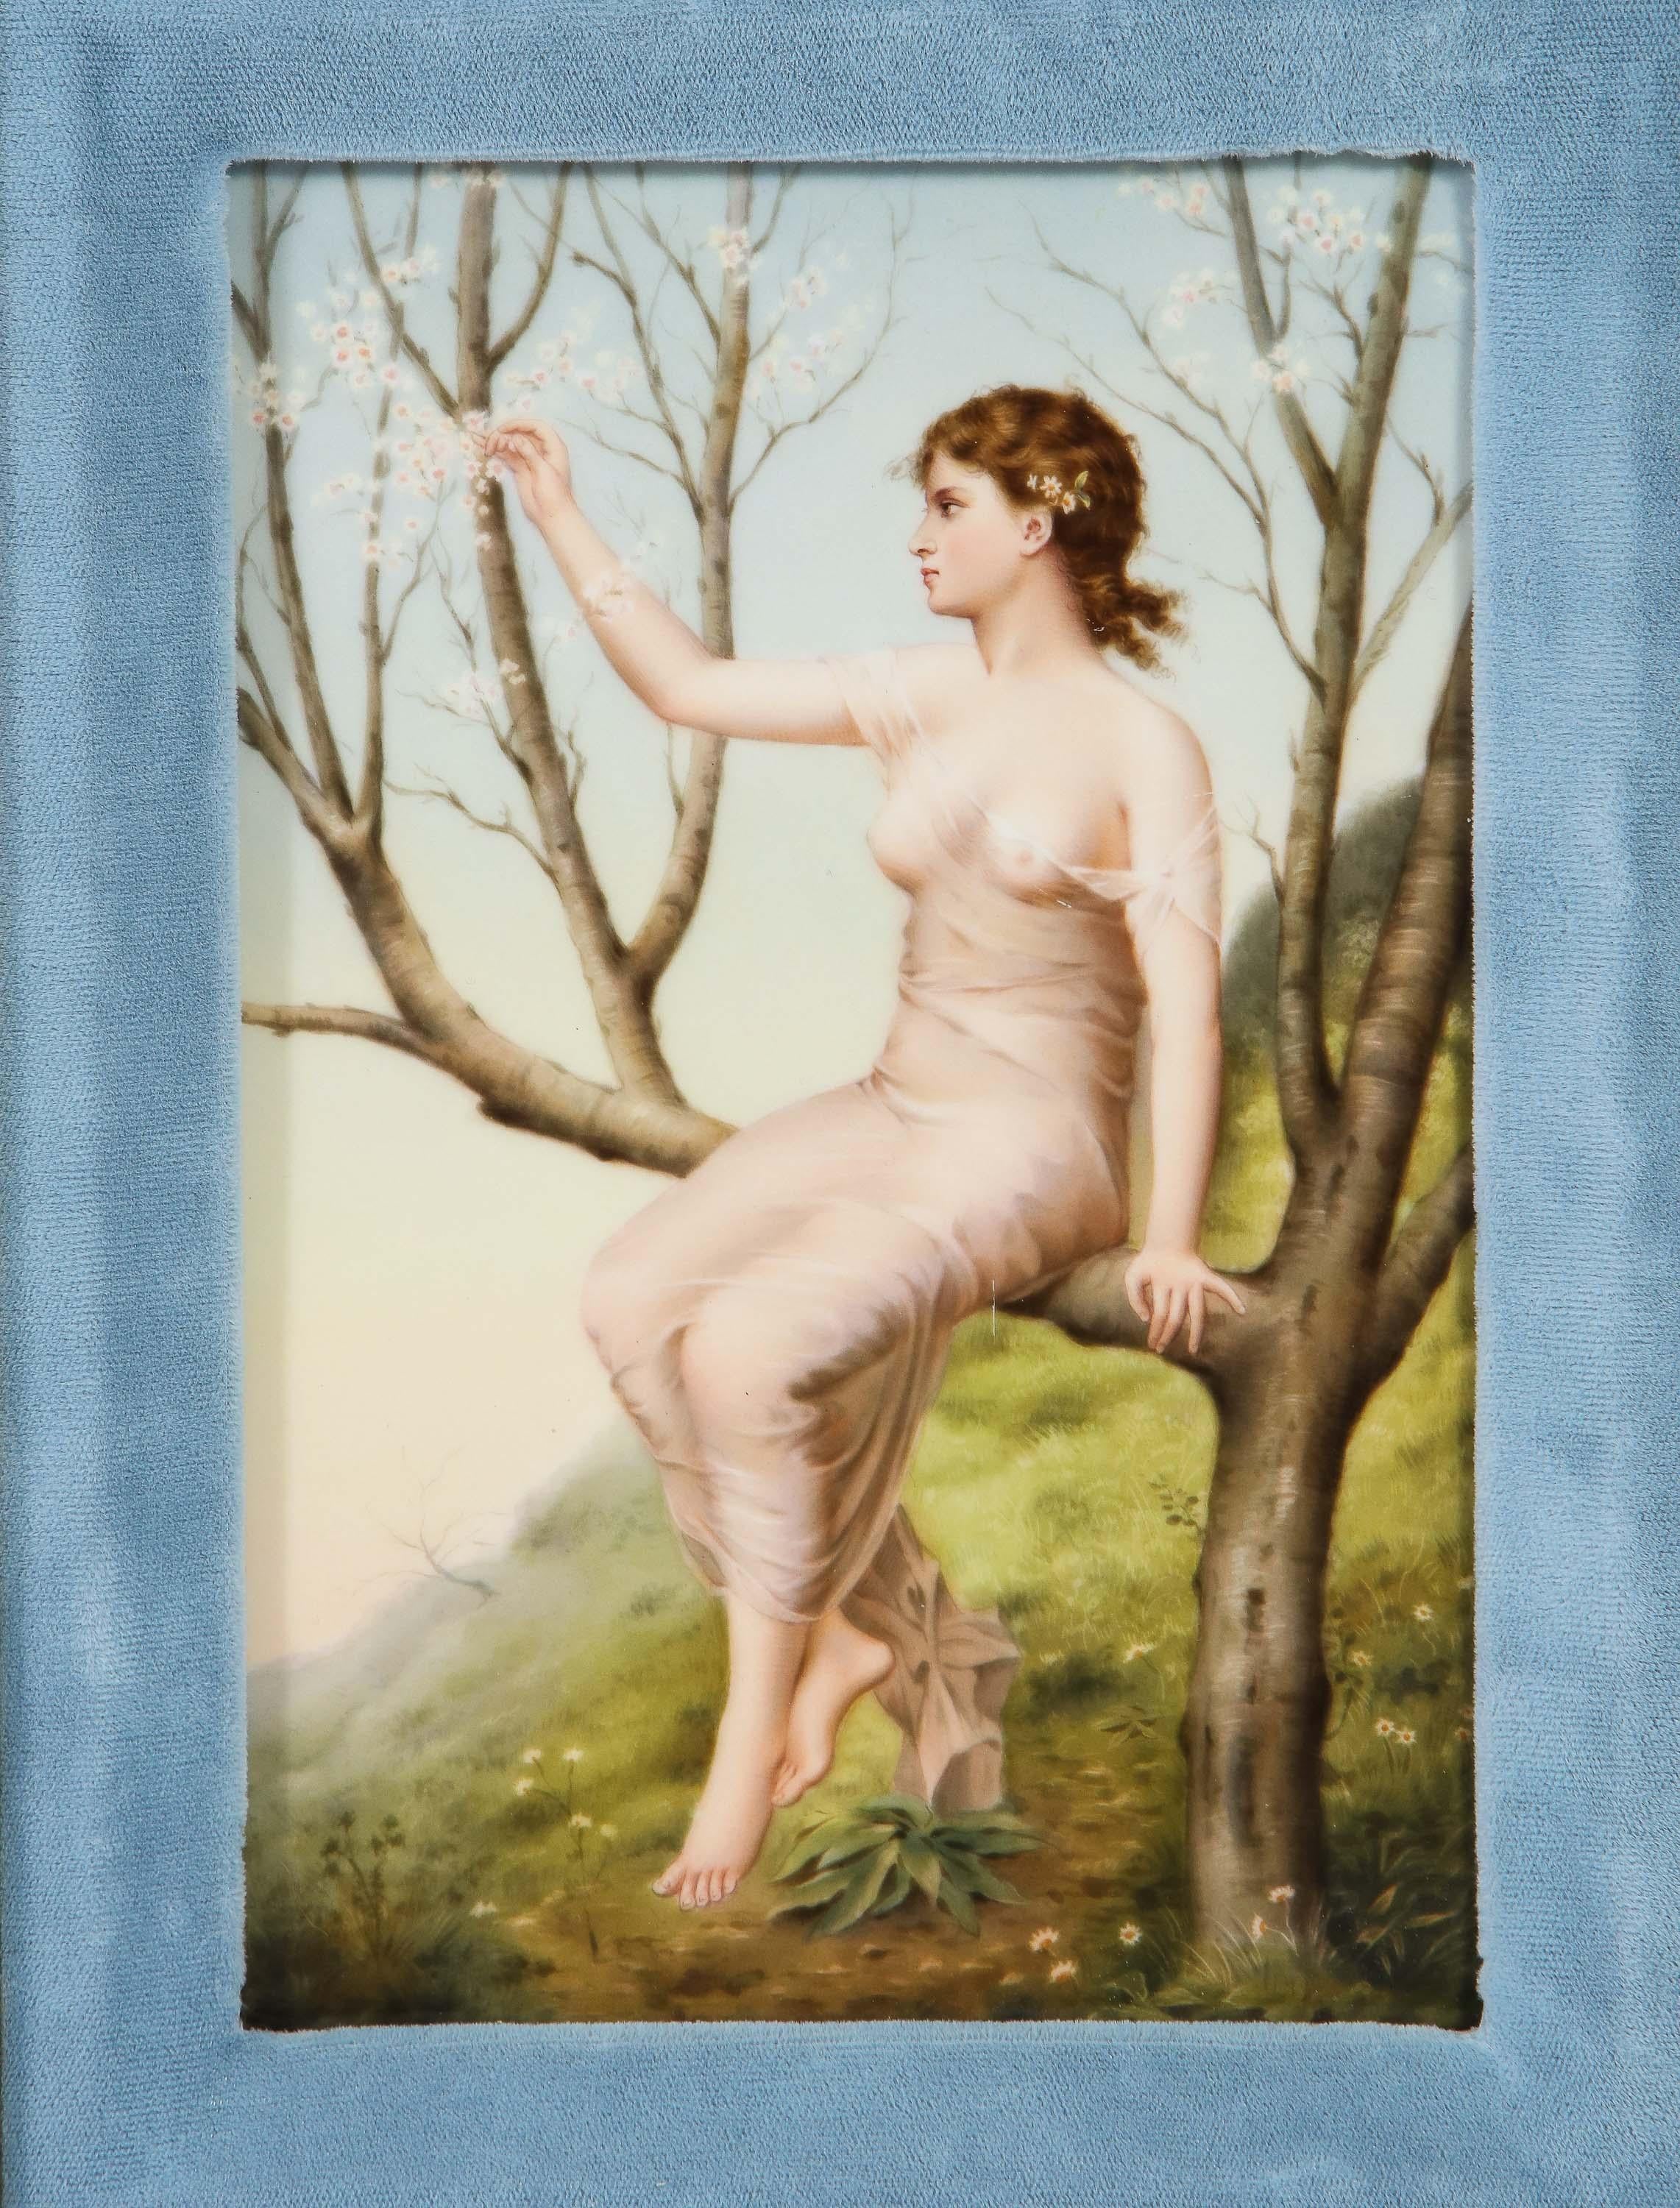 A fine quality antique Berlin K.P.M hand painted porcelain rectangular plaque, circa 1880 in a nice giltwood and blue velvet frame.

Finely painted KPM porcelain plaque depicting a semi-nude woman sitting on a tree in a forest picking flowers. Very